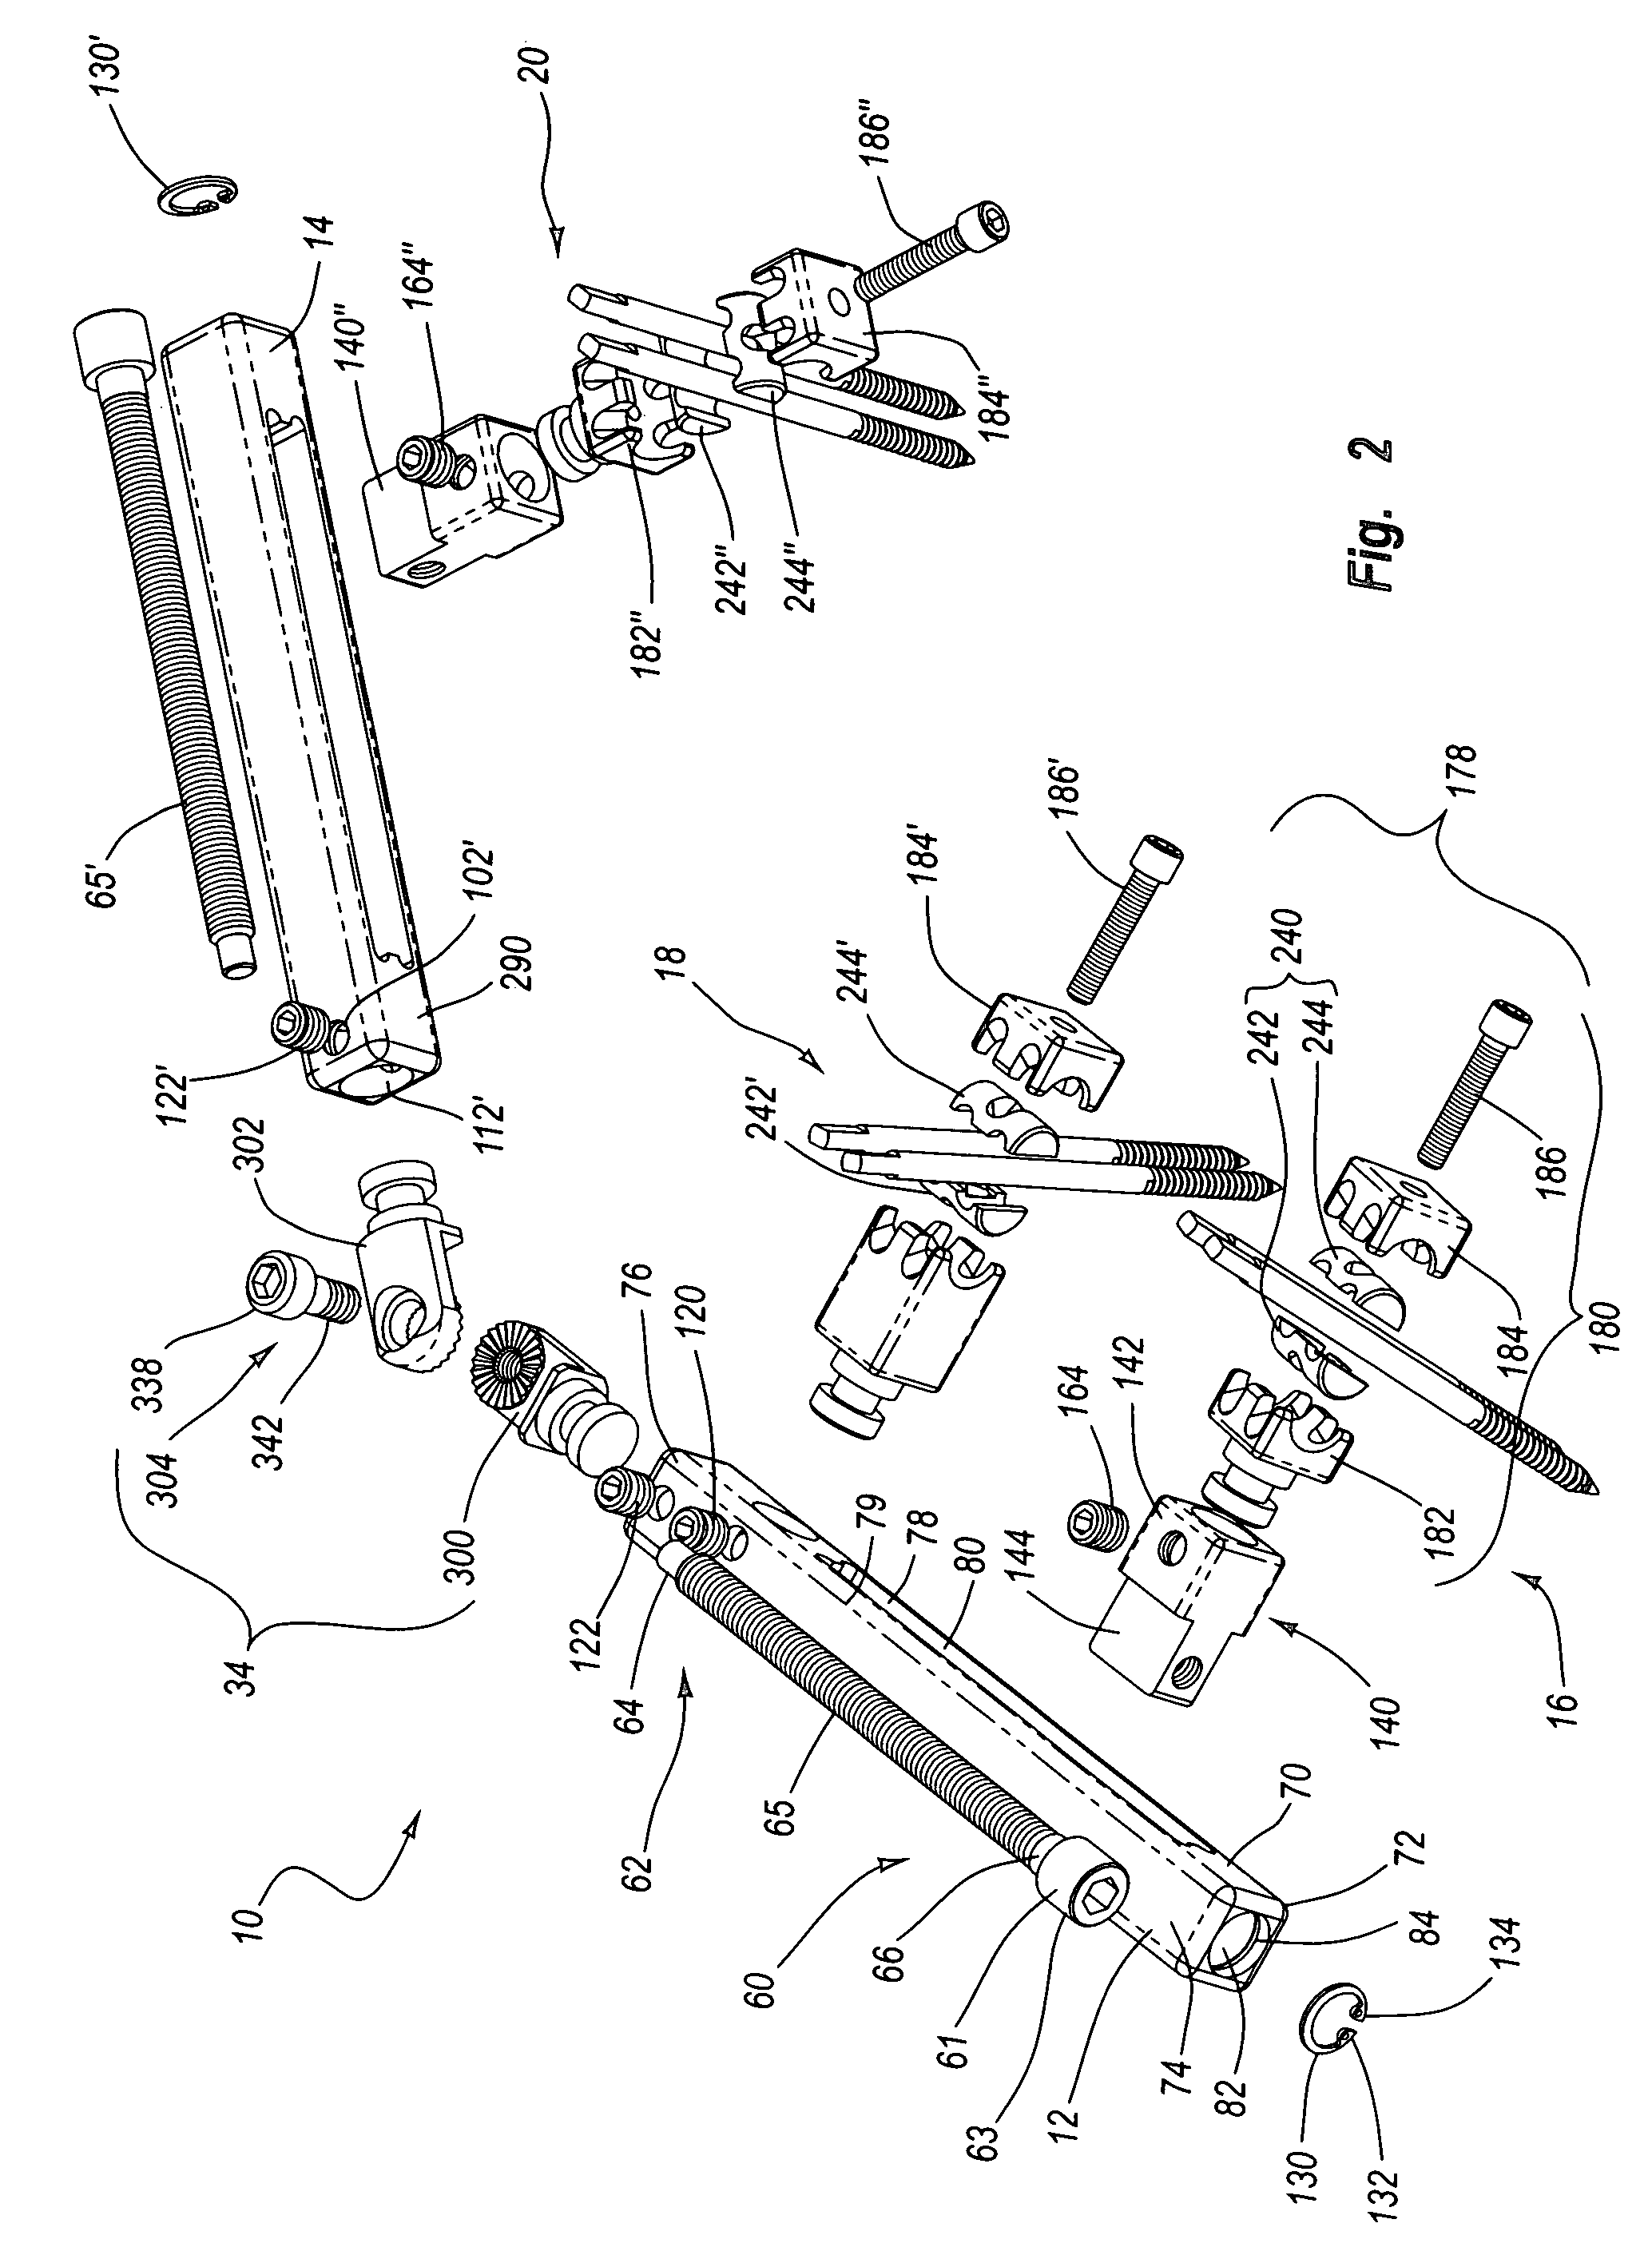 Adjustable splint for osteosynthesis